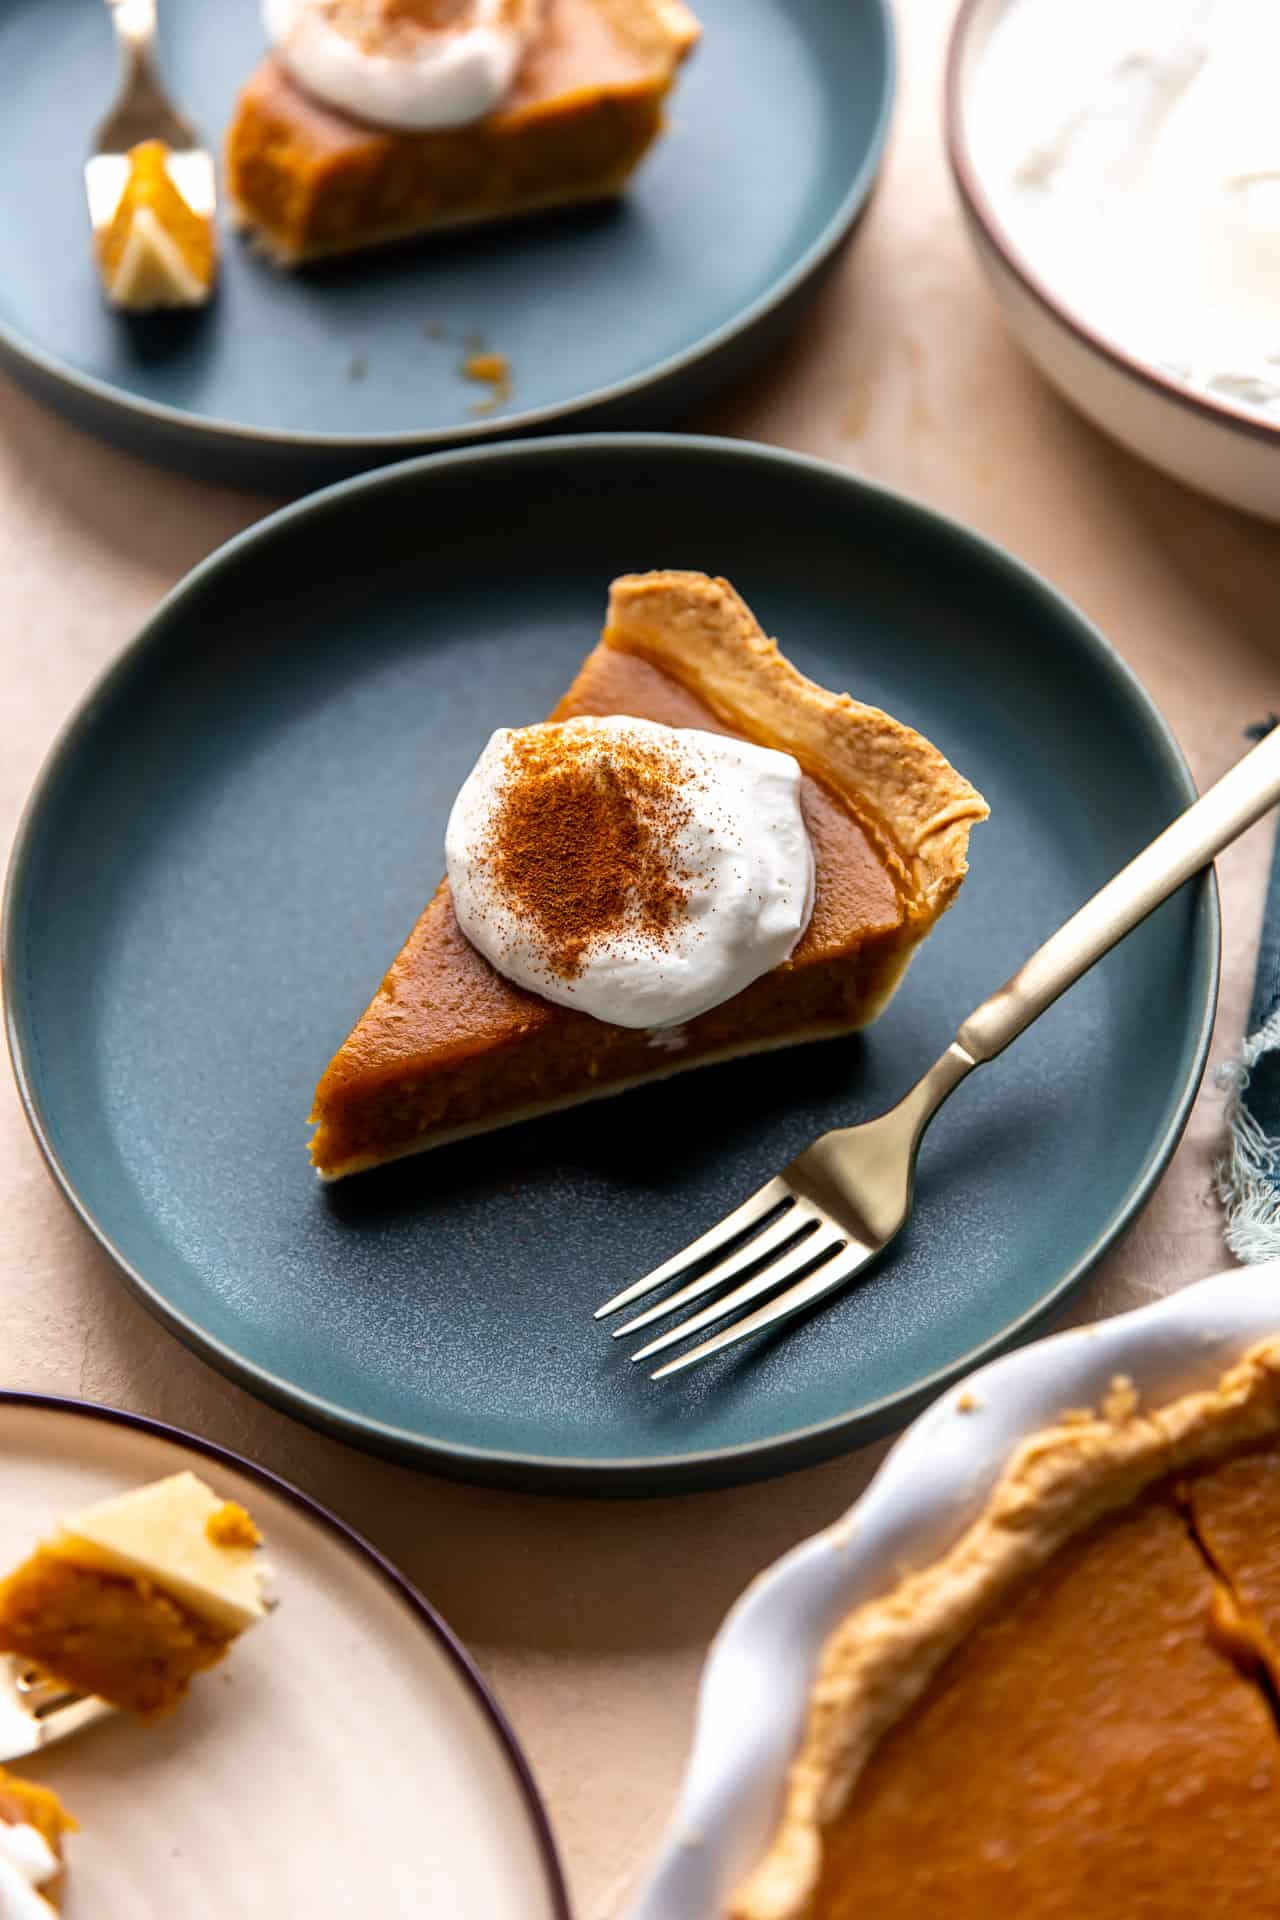 Slice of Butternut squash pie served on a plate with a dollop of whipped cream and sprinkled with cinnamon.